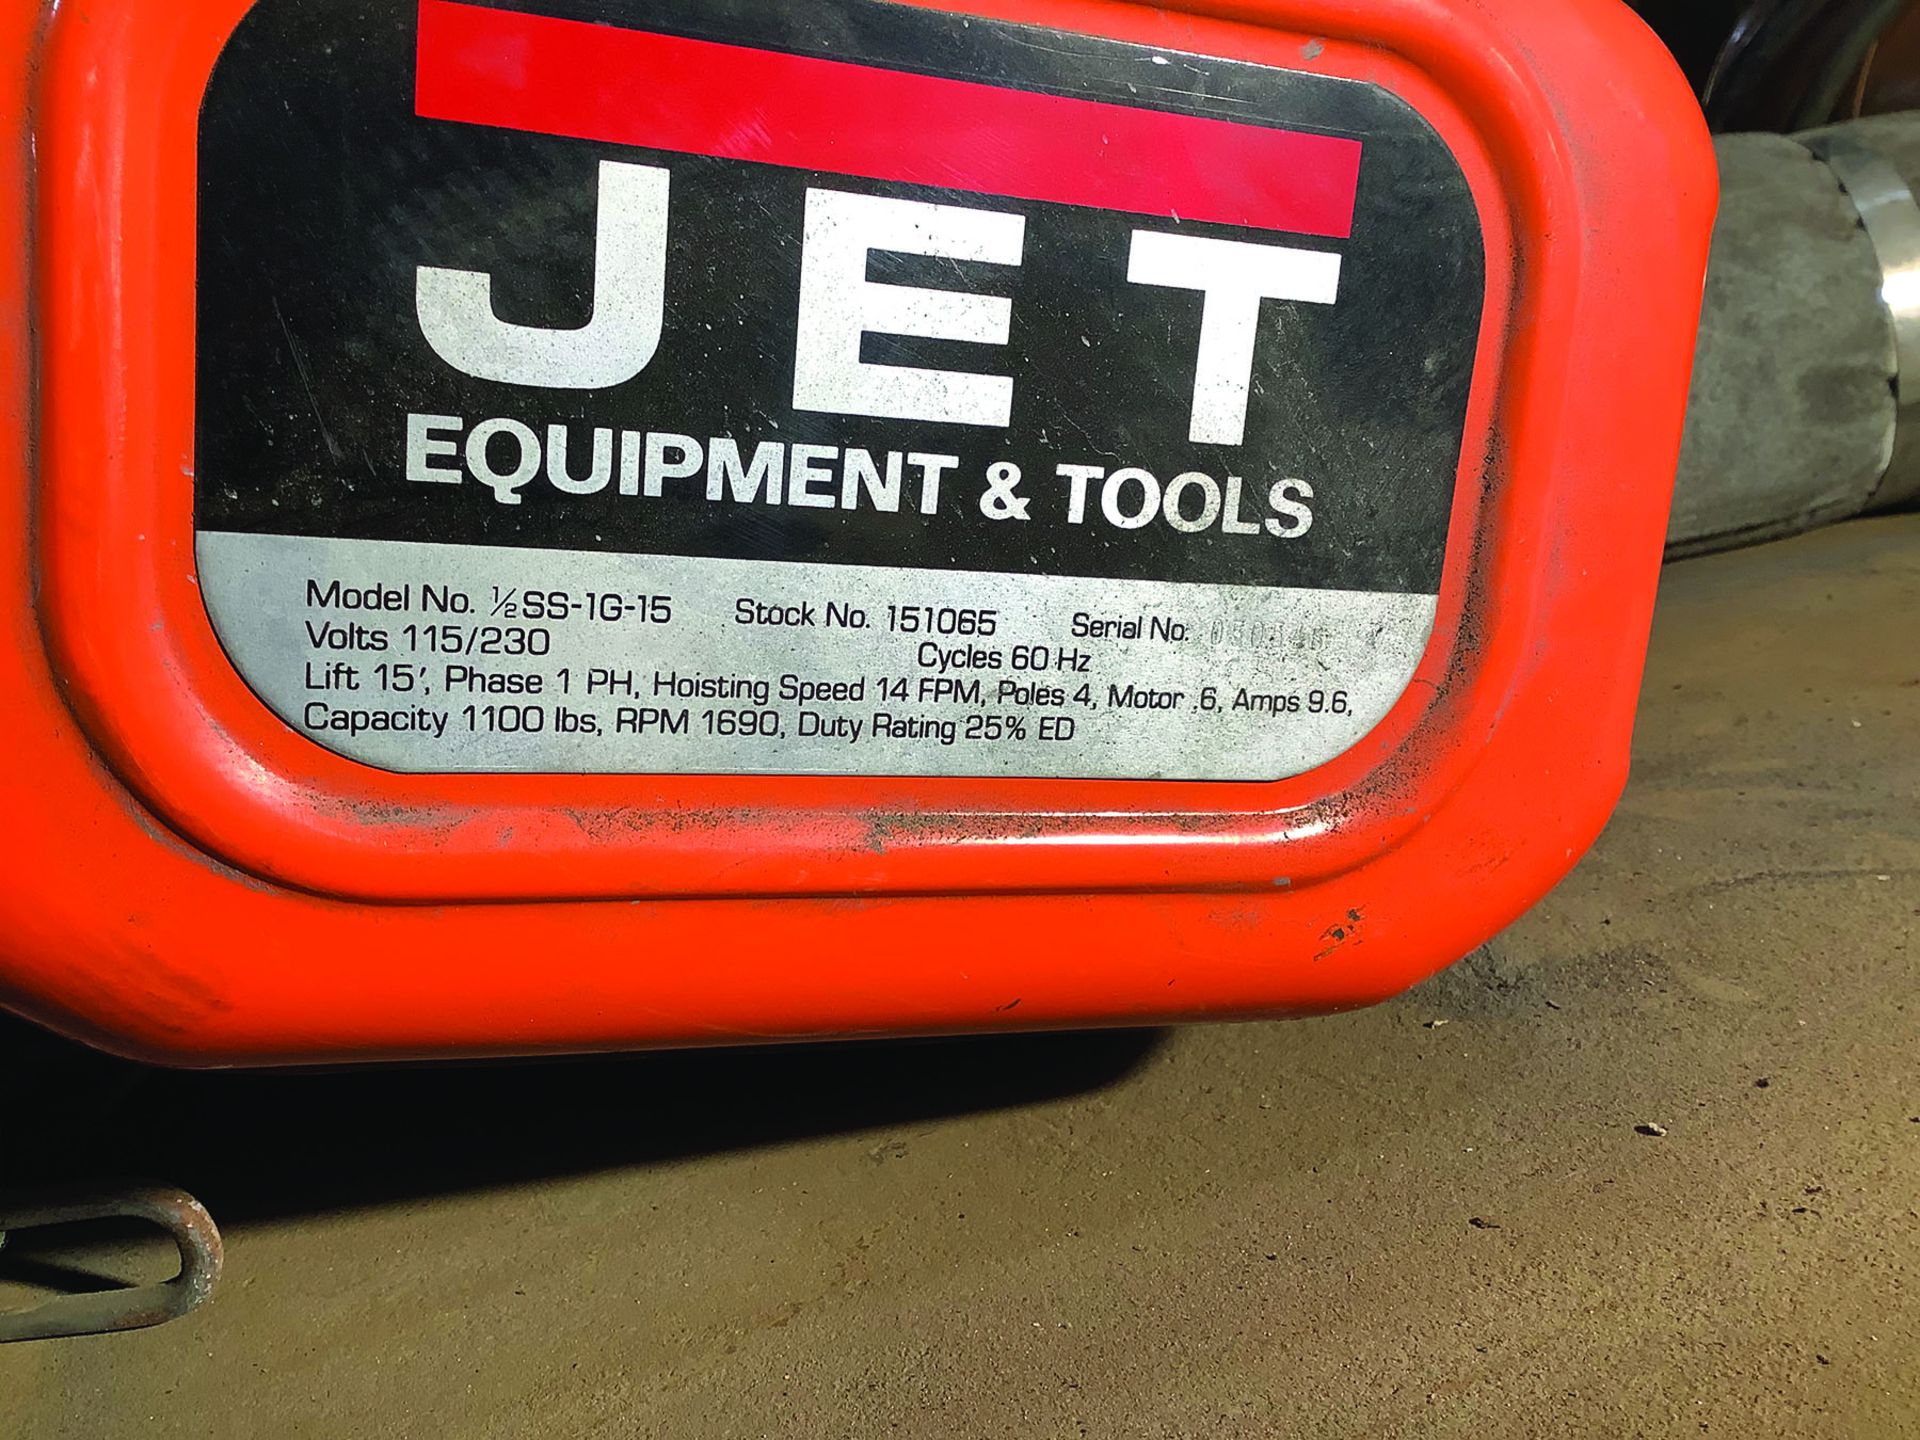 JET MODEL 1/2SS-1G-15 1/2 TON ELECTRIC CHAIN HOIST - Image 3 of 3